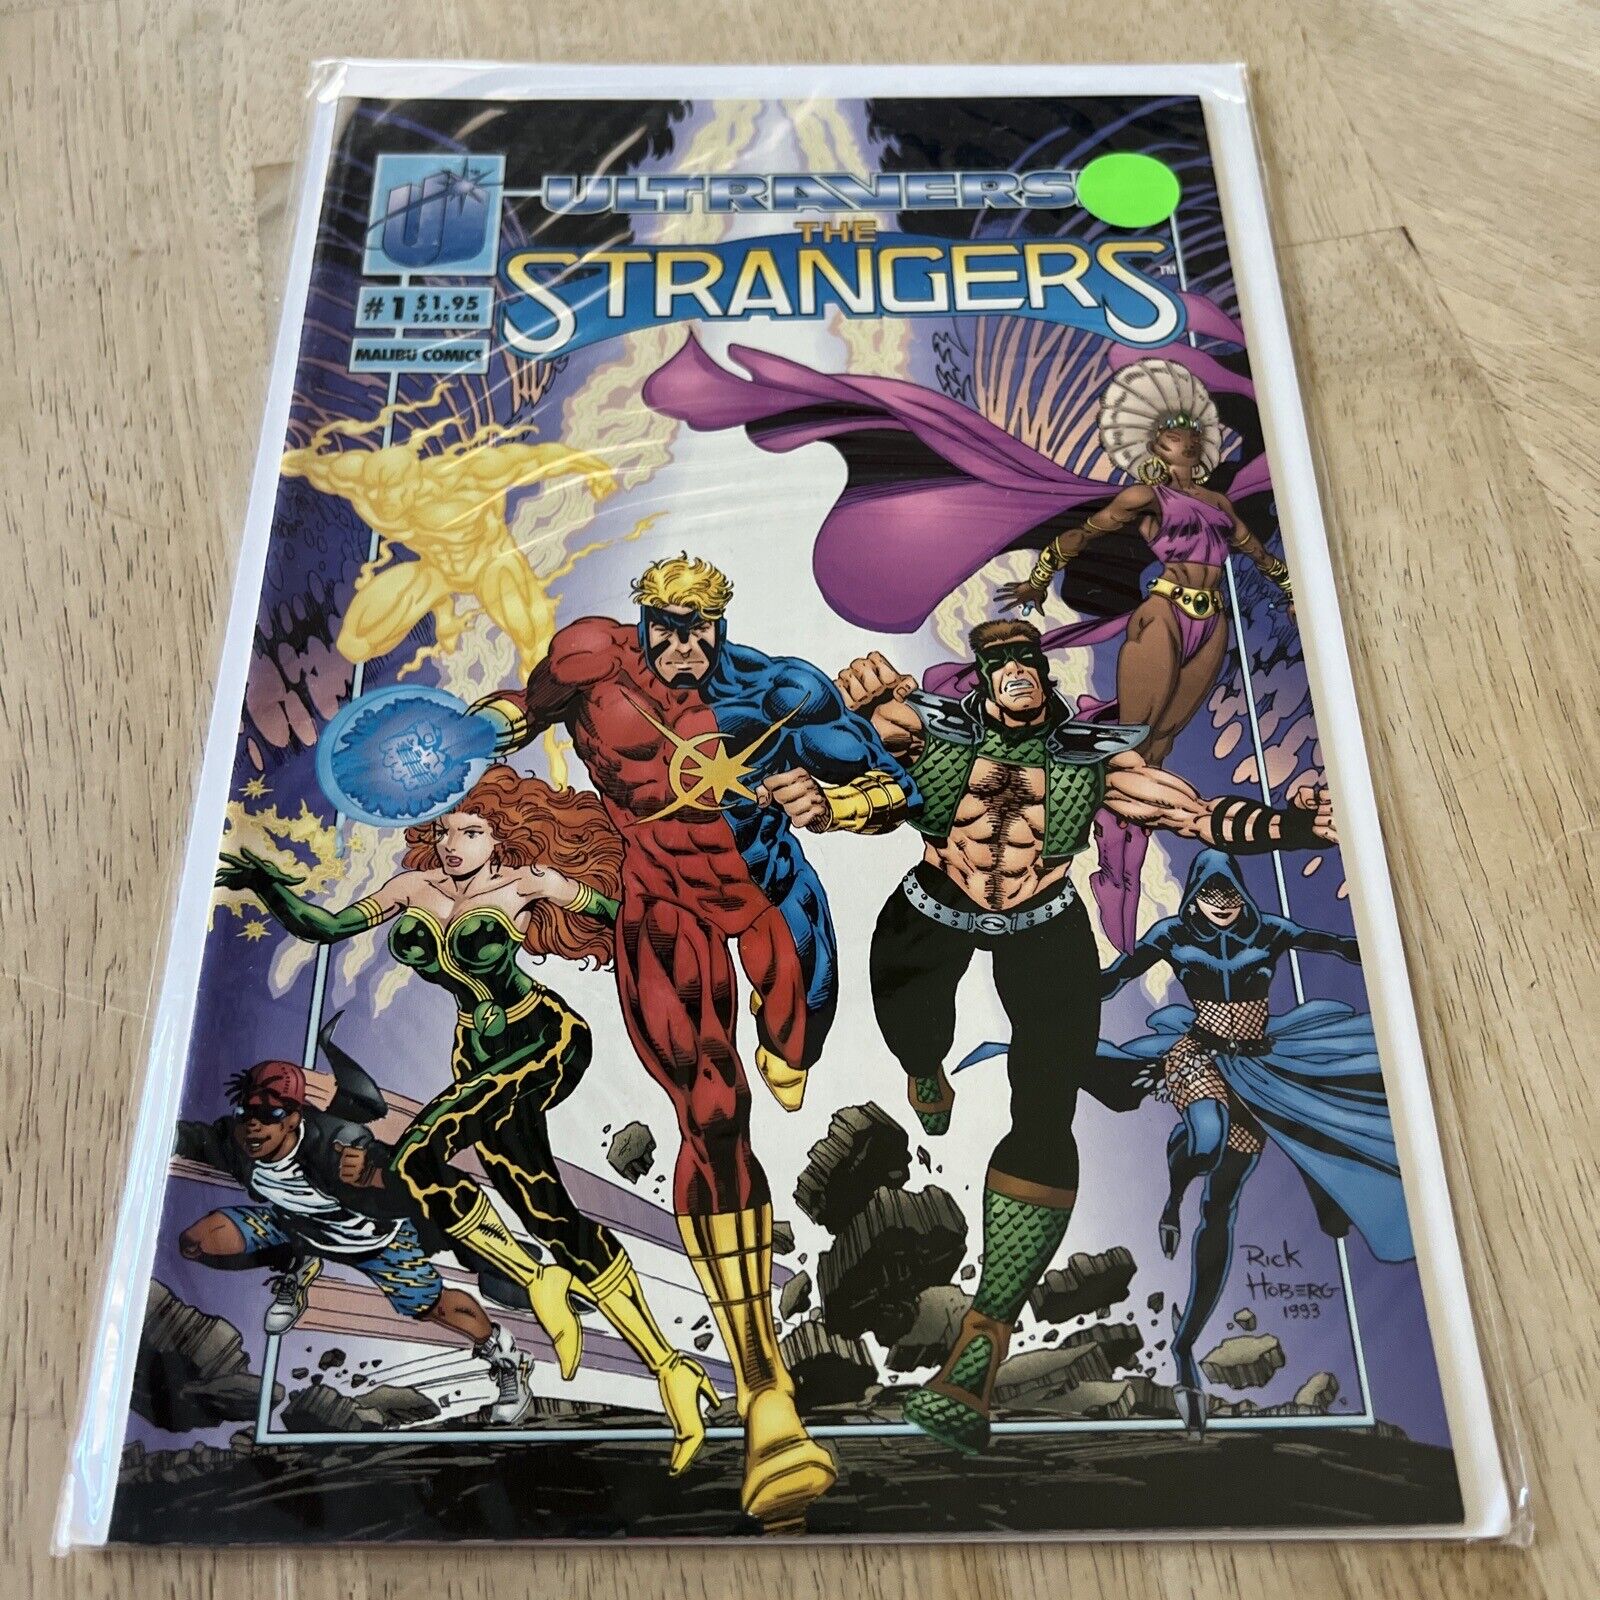 THE STRANGERS #1 ULTRA LIMITED EDITION Ultraverse Comic Book June 1993  1st ed